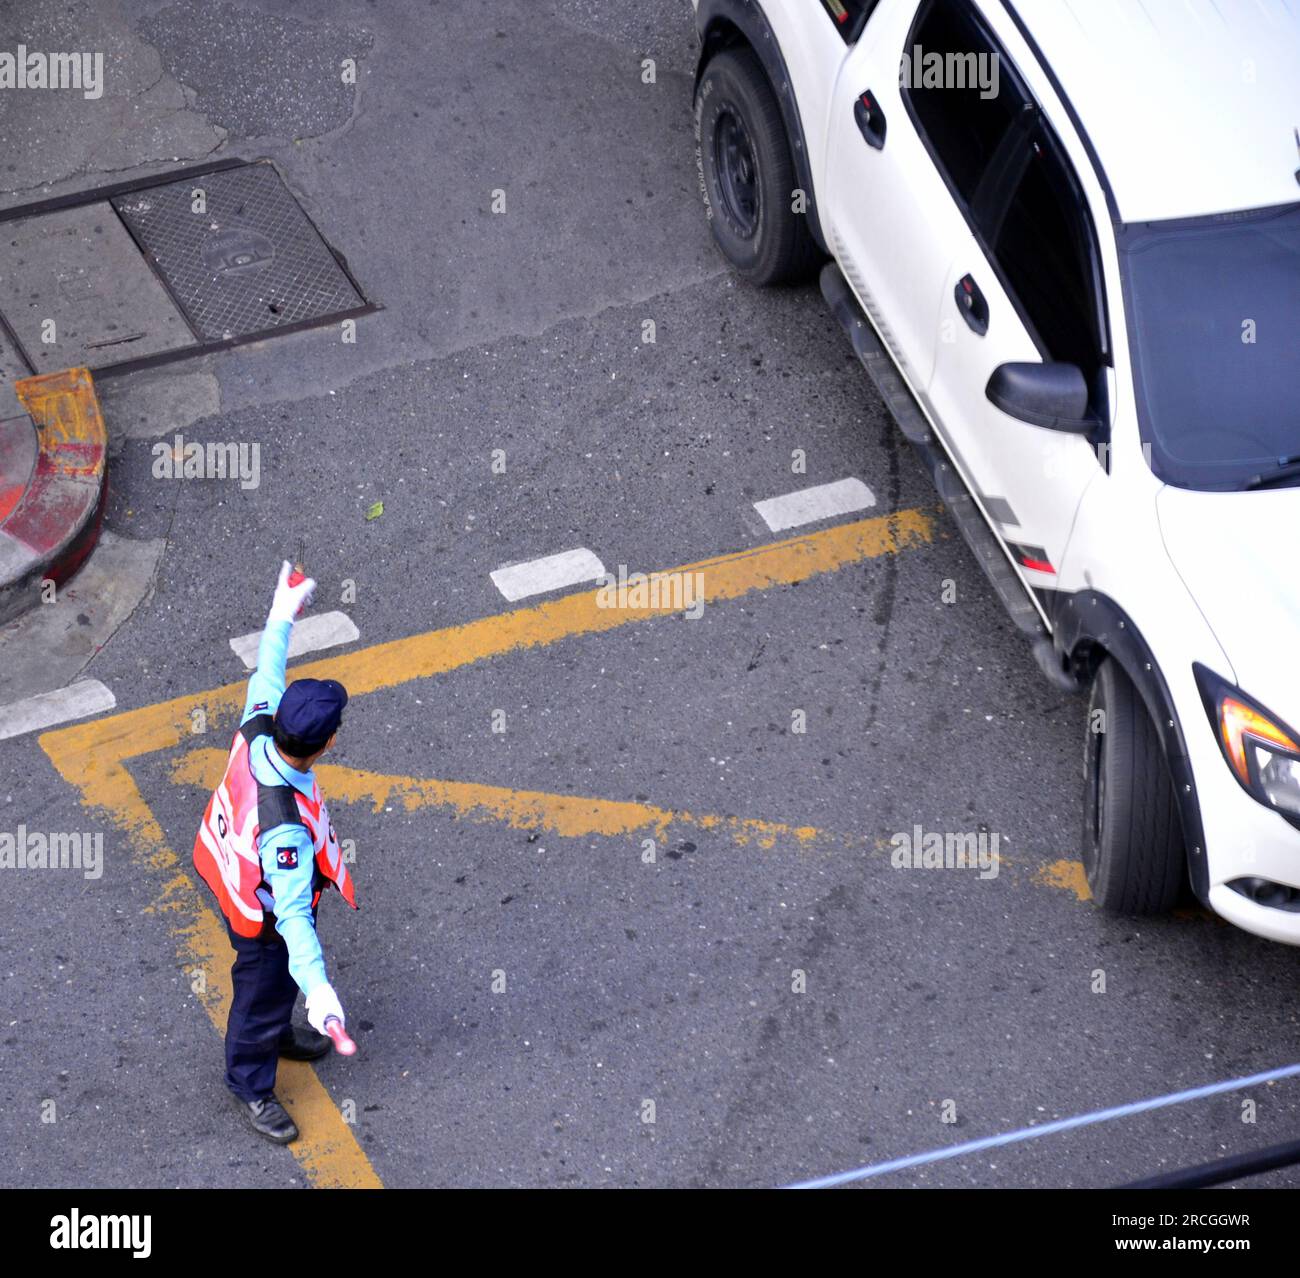 Overhead view of a male security guard, managing traffic on Surawong Road, Bangkok, Thailand, as a white car emerges from a side road to join the main road, named Surawong. Traffic accidents are common in Thailand and Surawong is a busy road, often filled with fast moving vehicles. Stock Photo